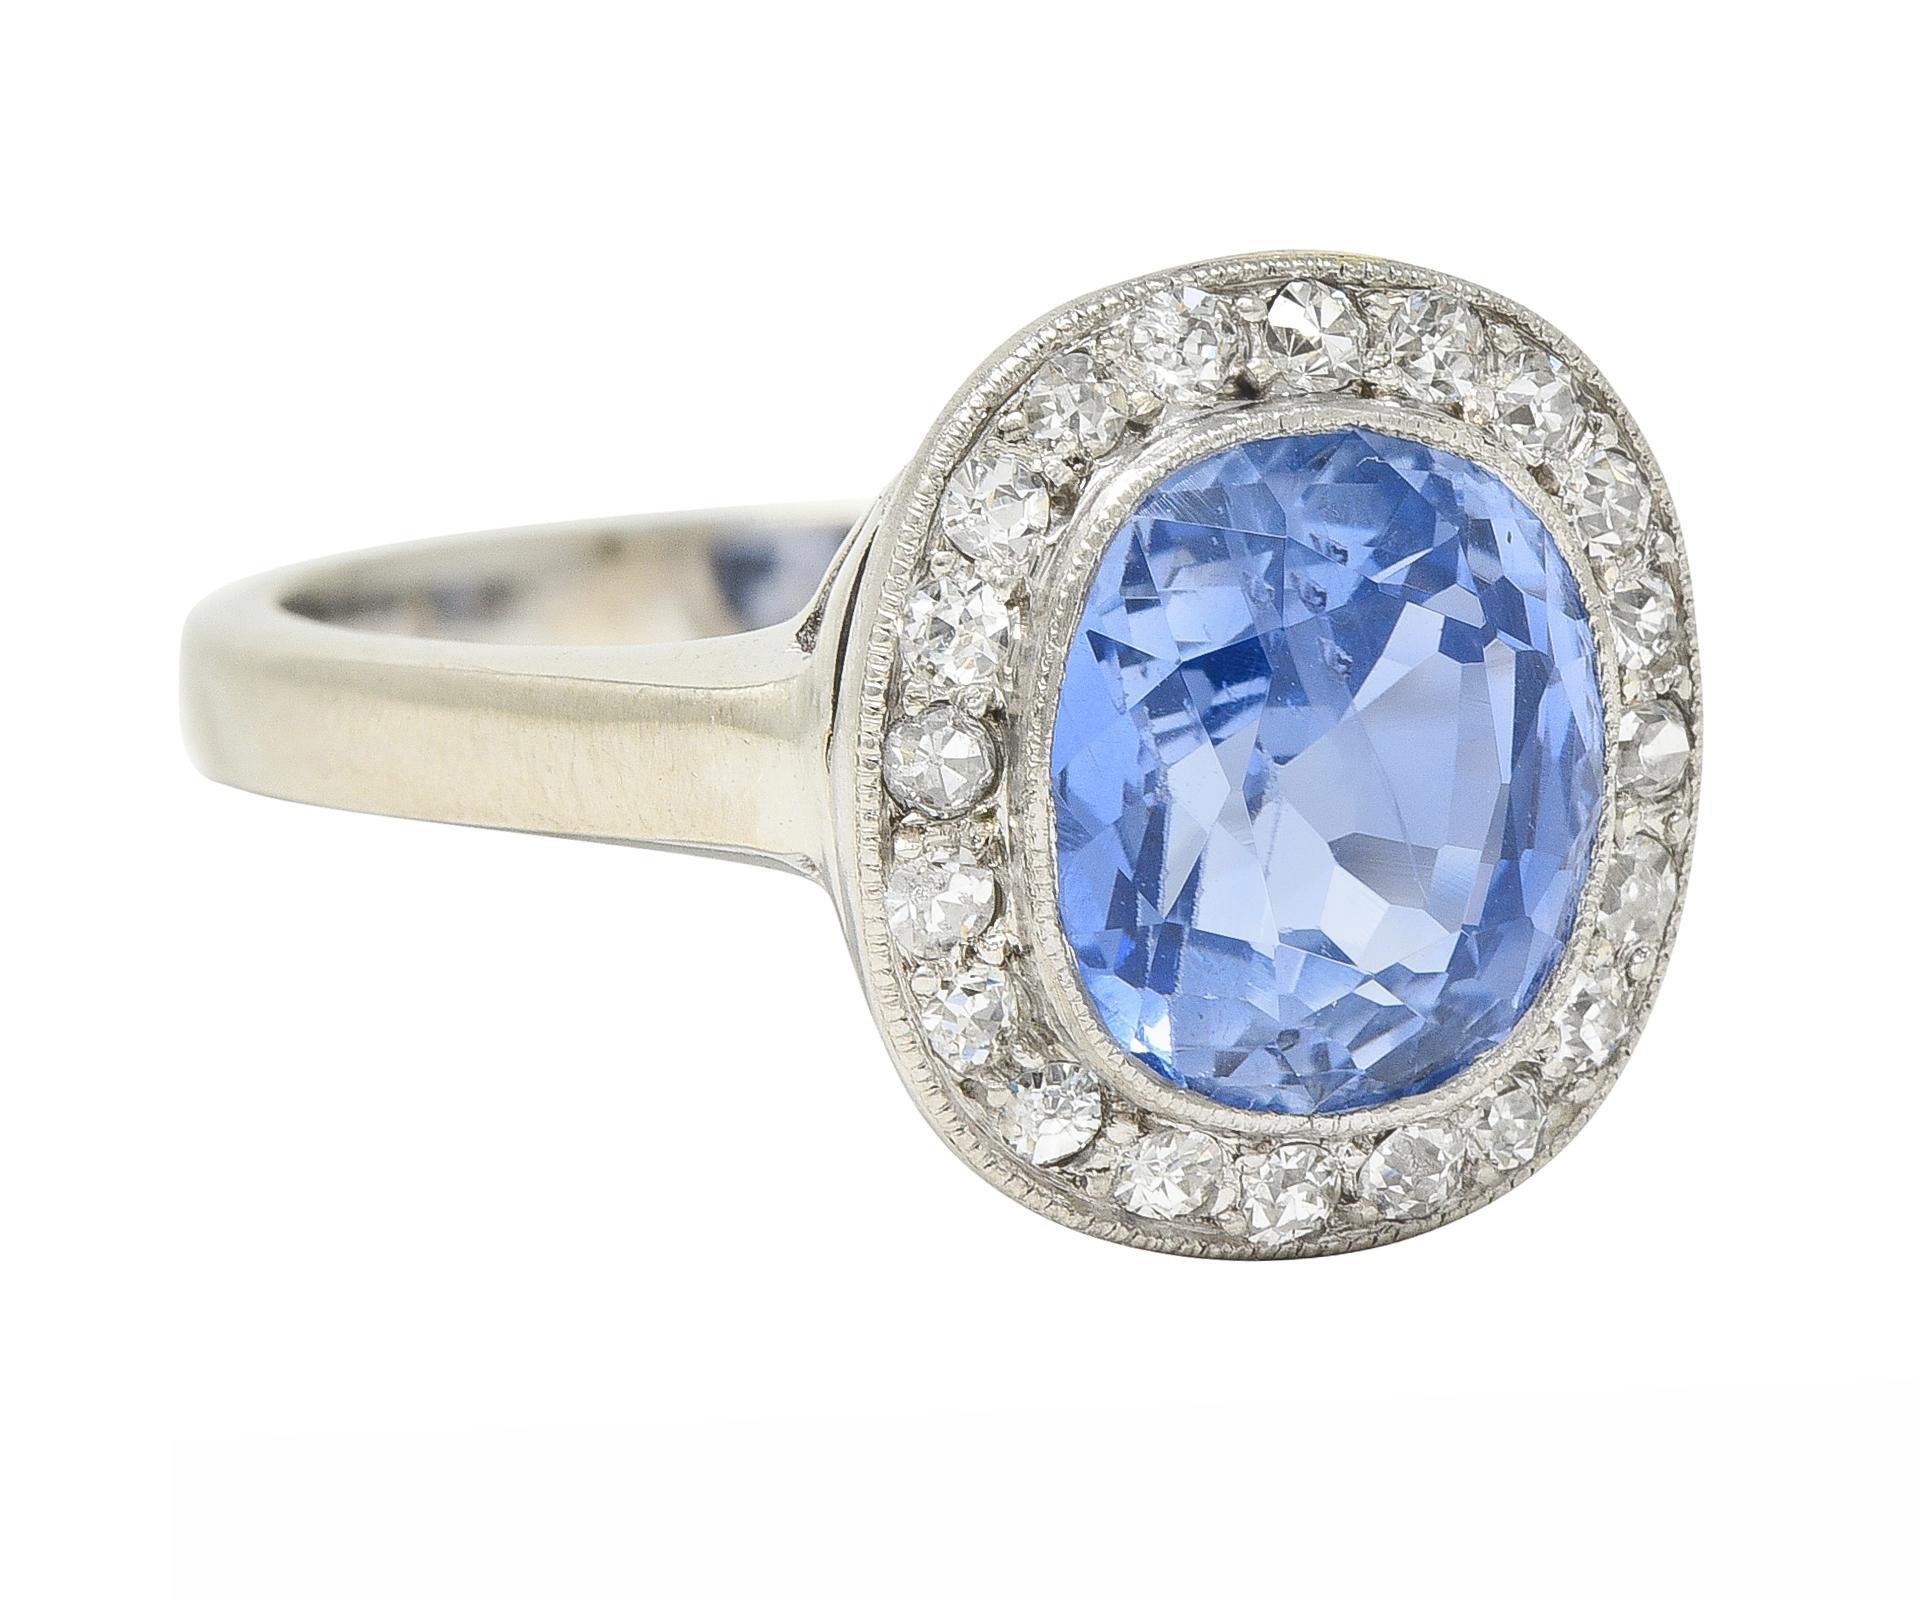 Centering a cushion cut sapphire weighing 3.61 carats - transparent medium blue in color 
Natural Sri Lankan in origin with no indications of heat treatment - bezel set
Featuring a halo surround of bead set old European cut diamonds 
G/H in color